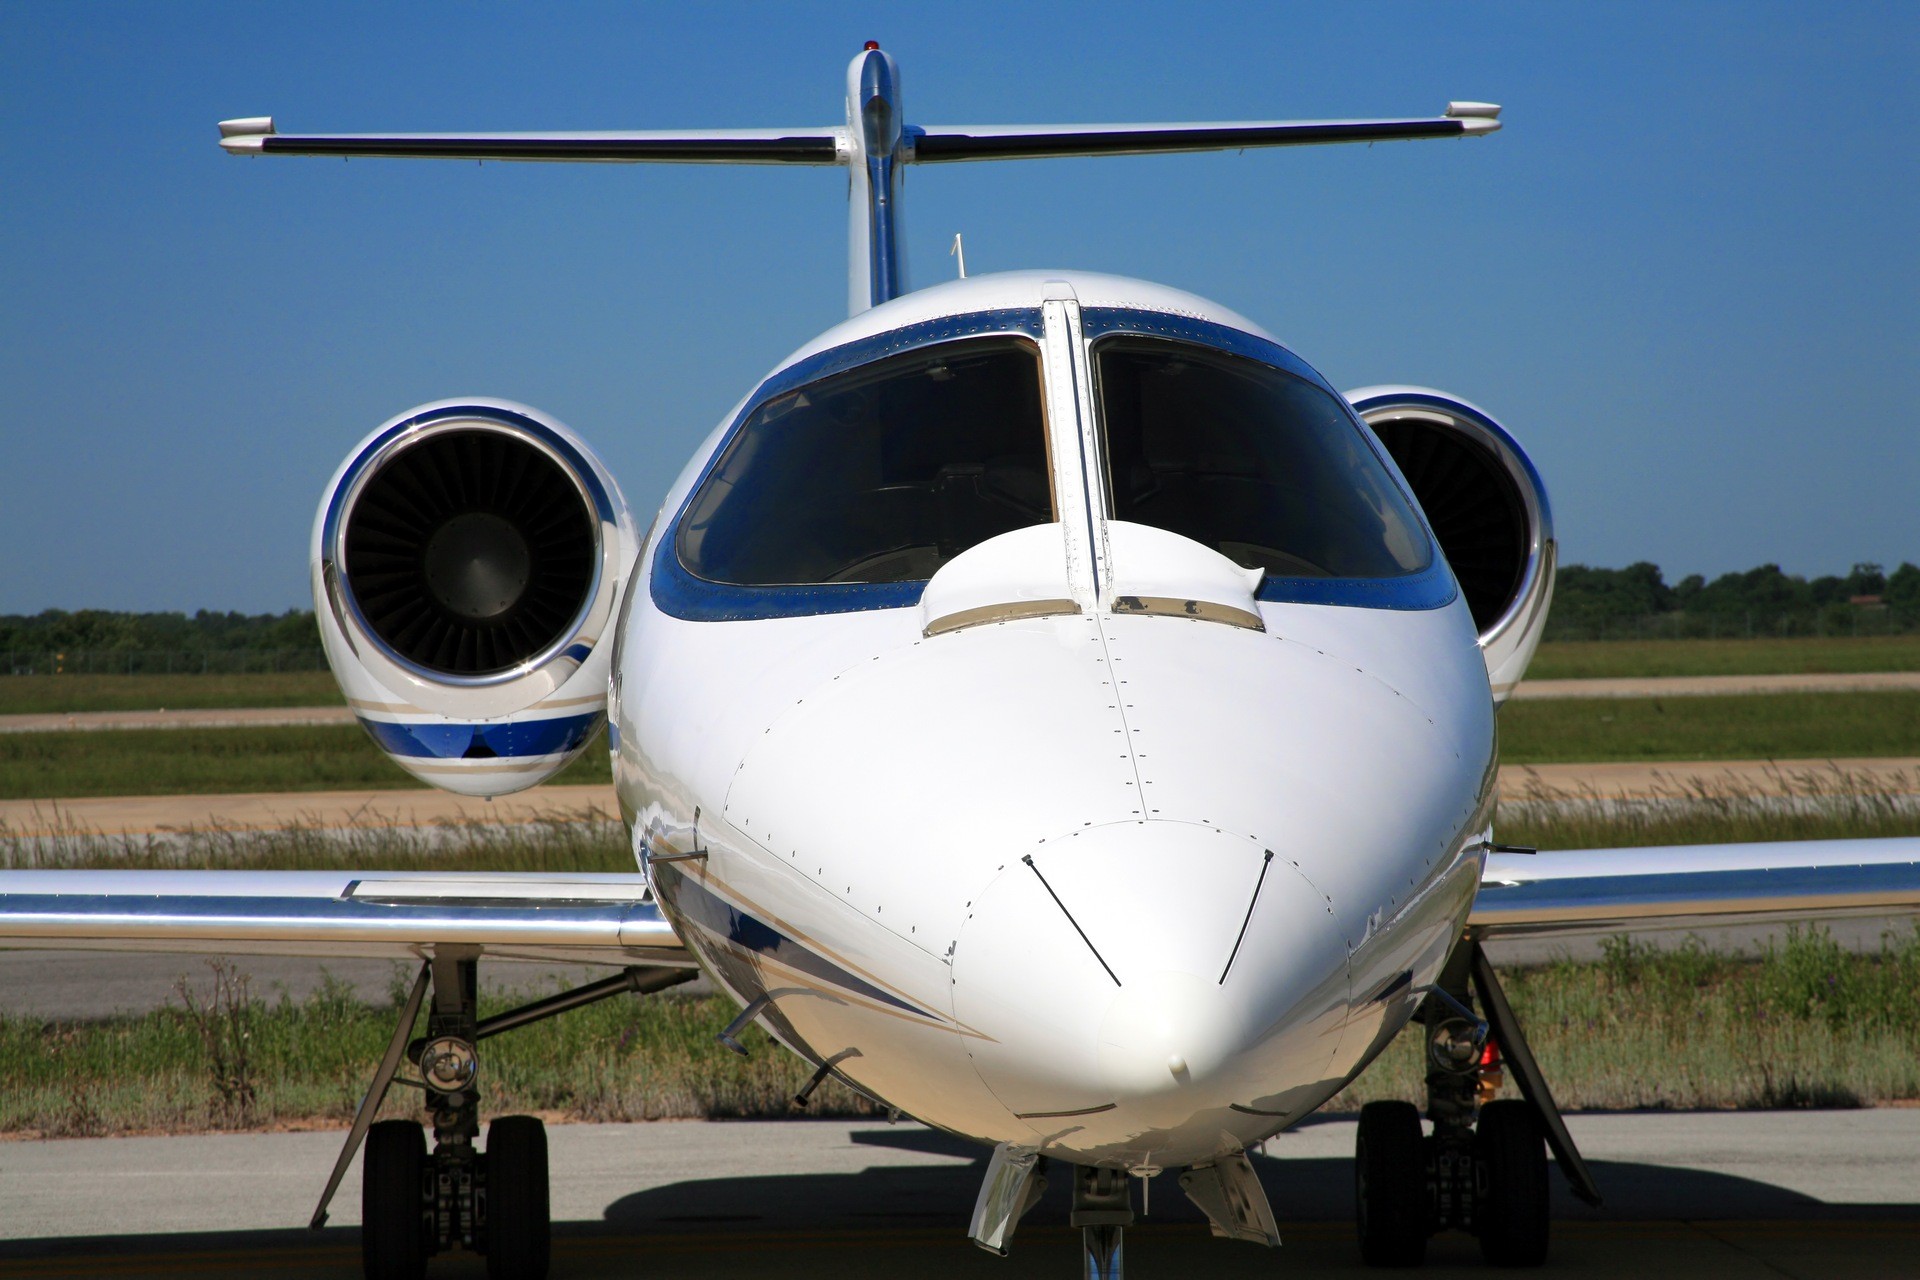 Learjet 55 Private Jet Charter